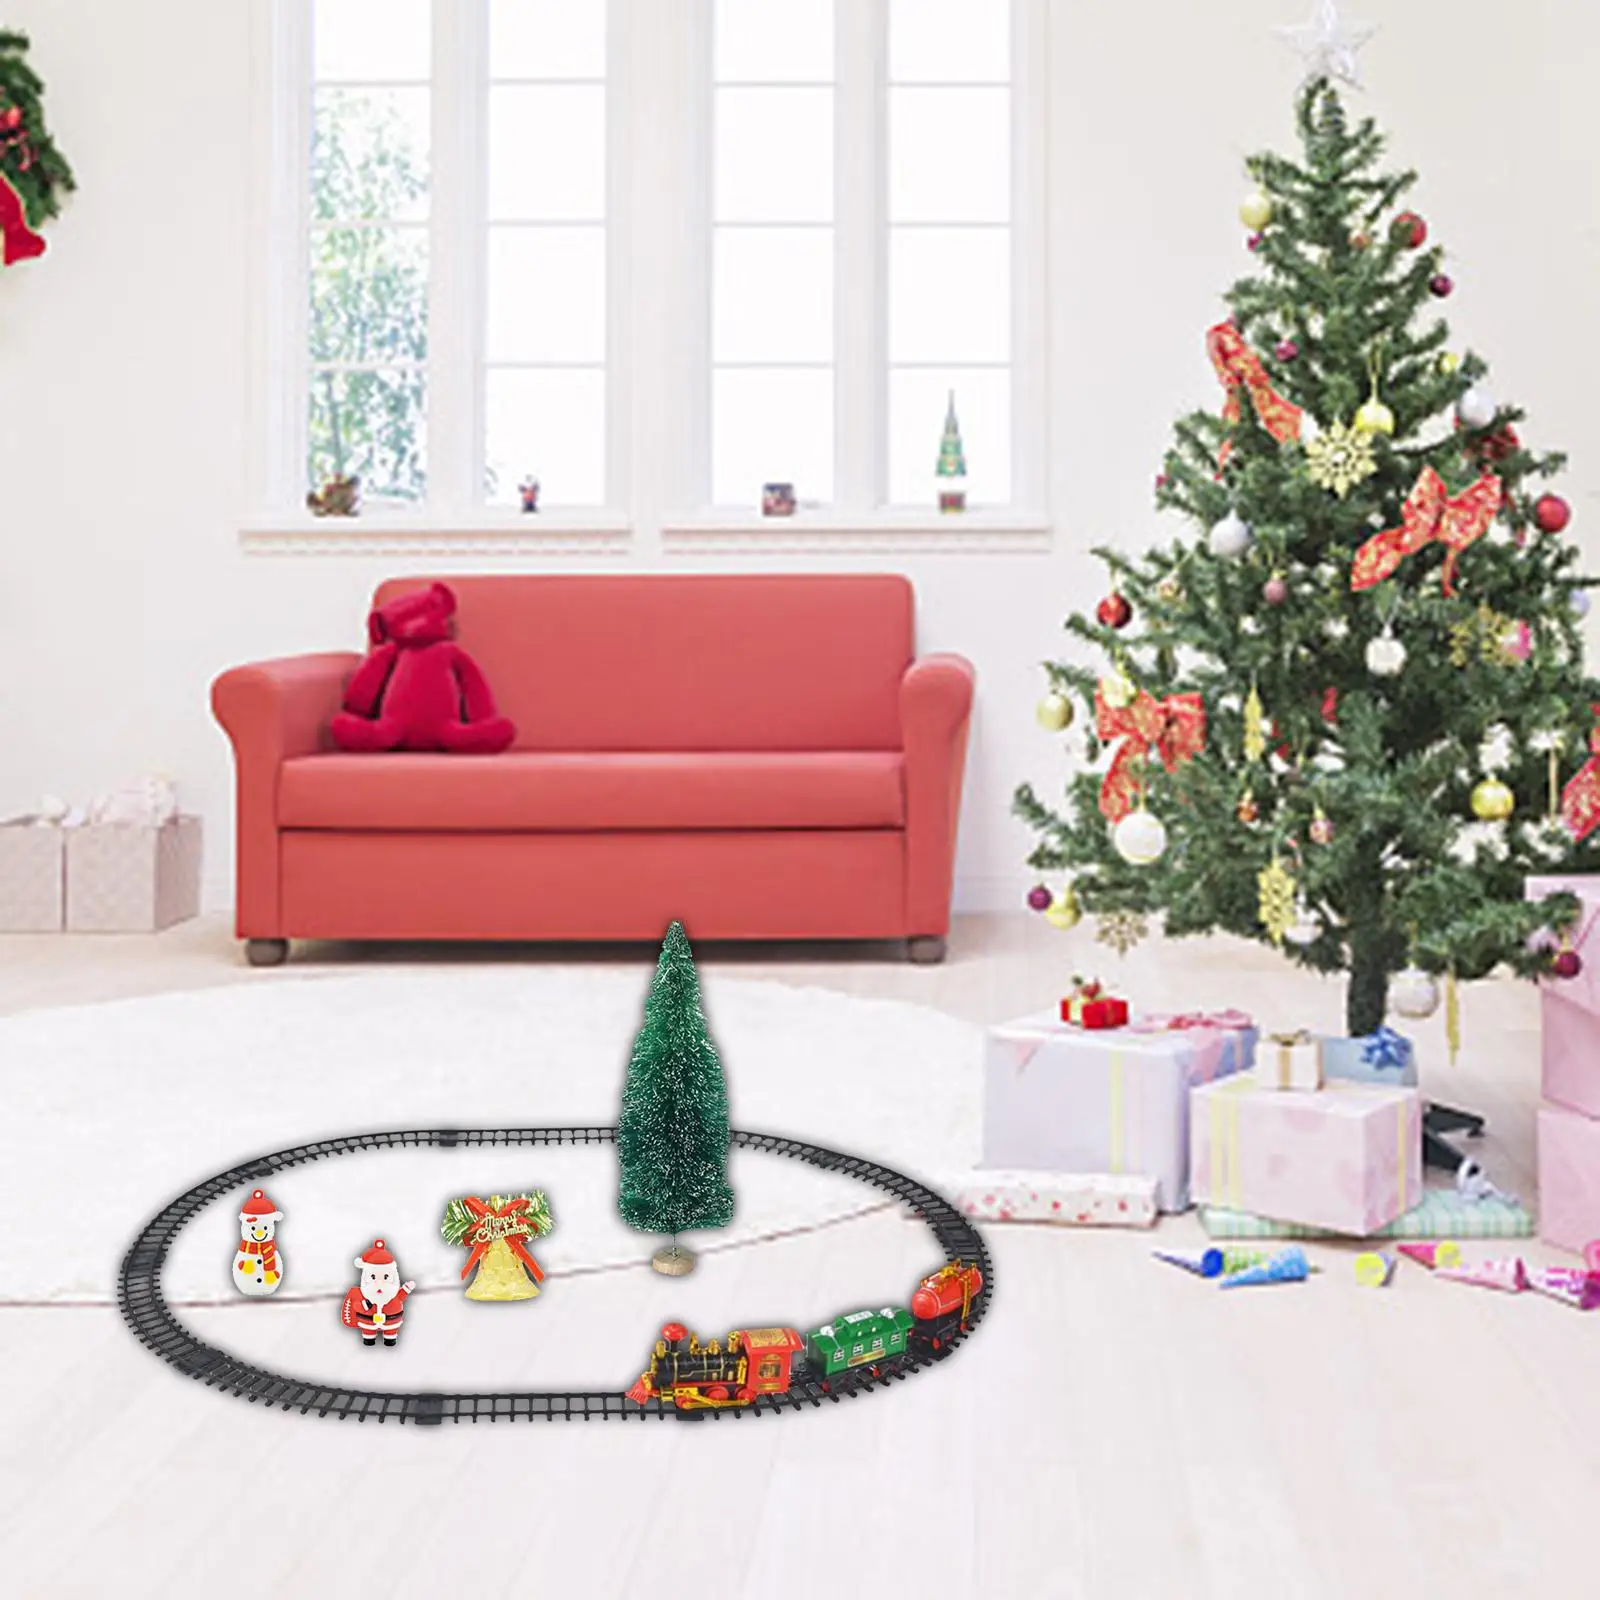 Electric Train Set Early Leaning Education Toy Railway Tracks Toy Building Construction Set for Girls Toddlers Kids Preschool